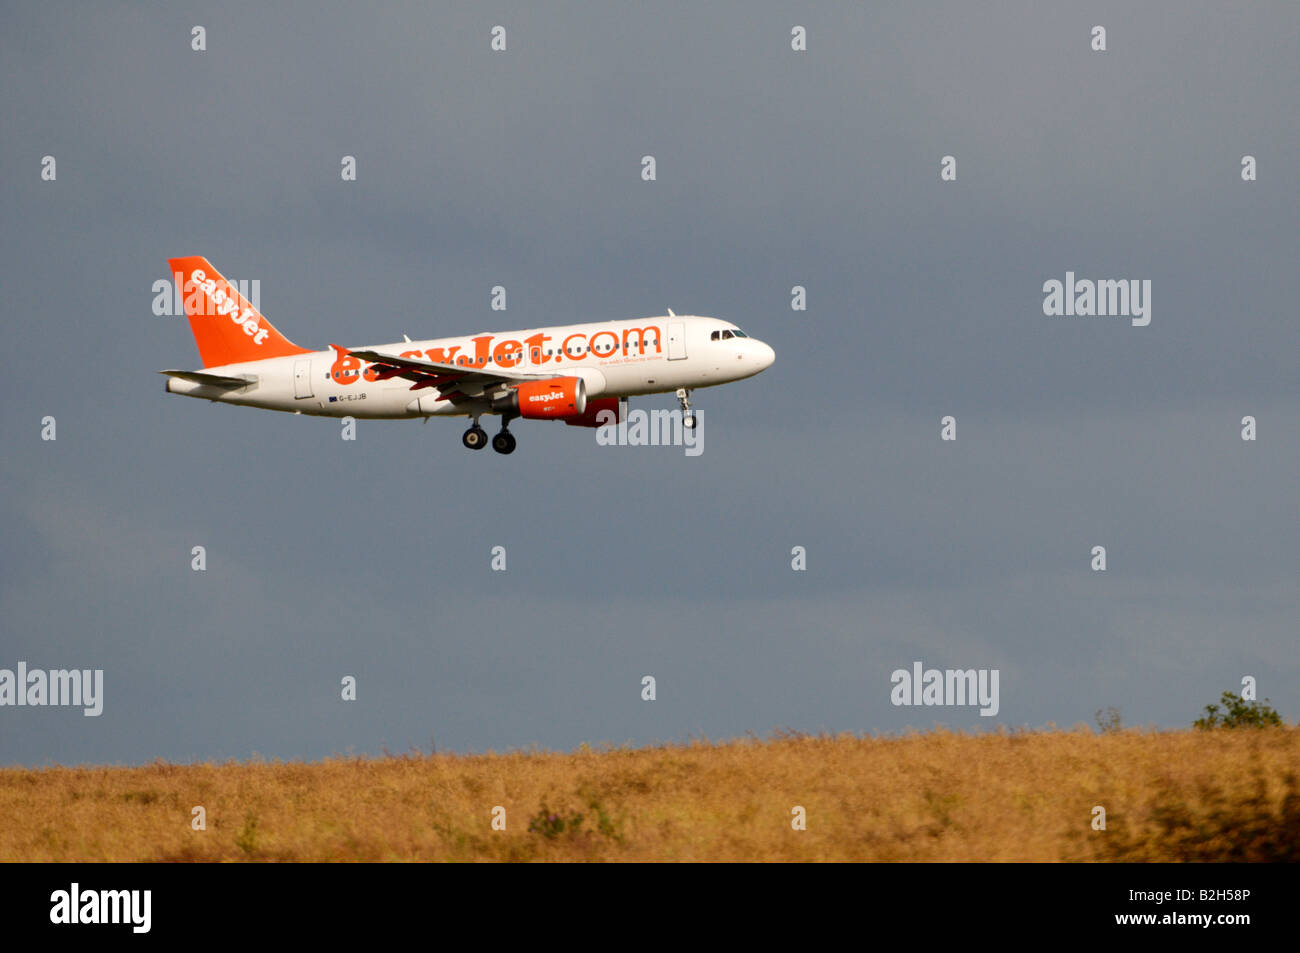 easyJet Airbus A319 Stansted heat haze effect appearing to land on a hilly wheat field Stock Photo